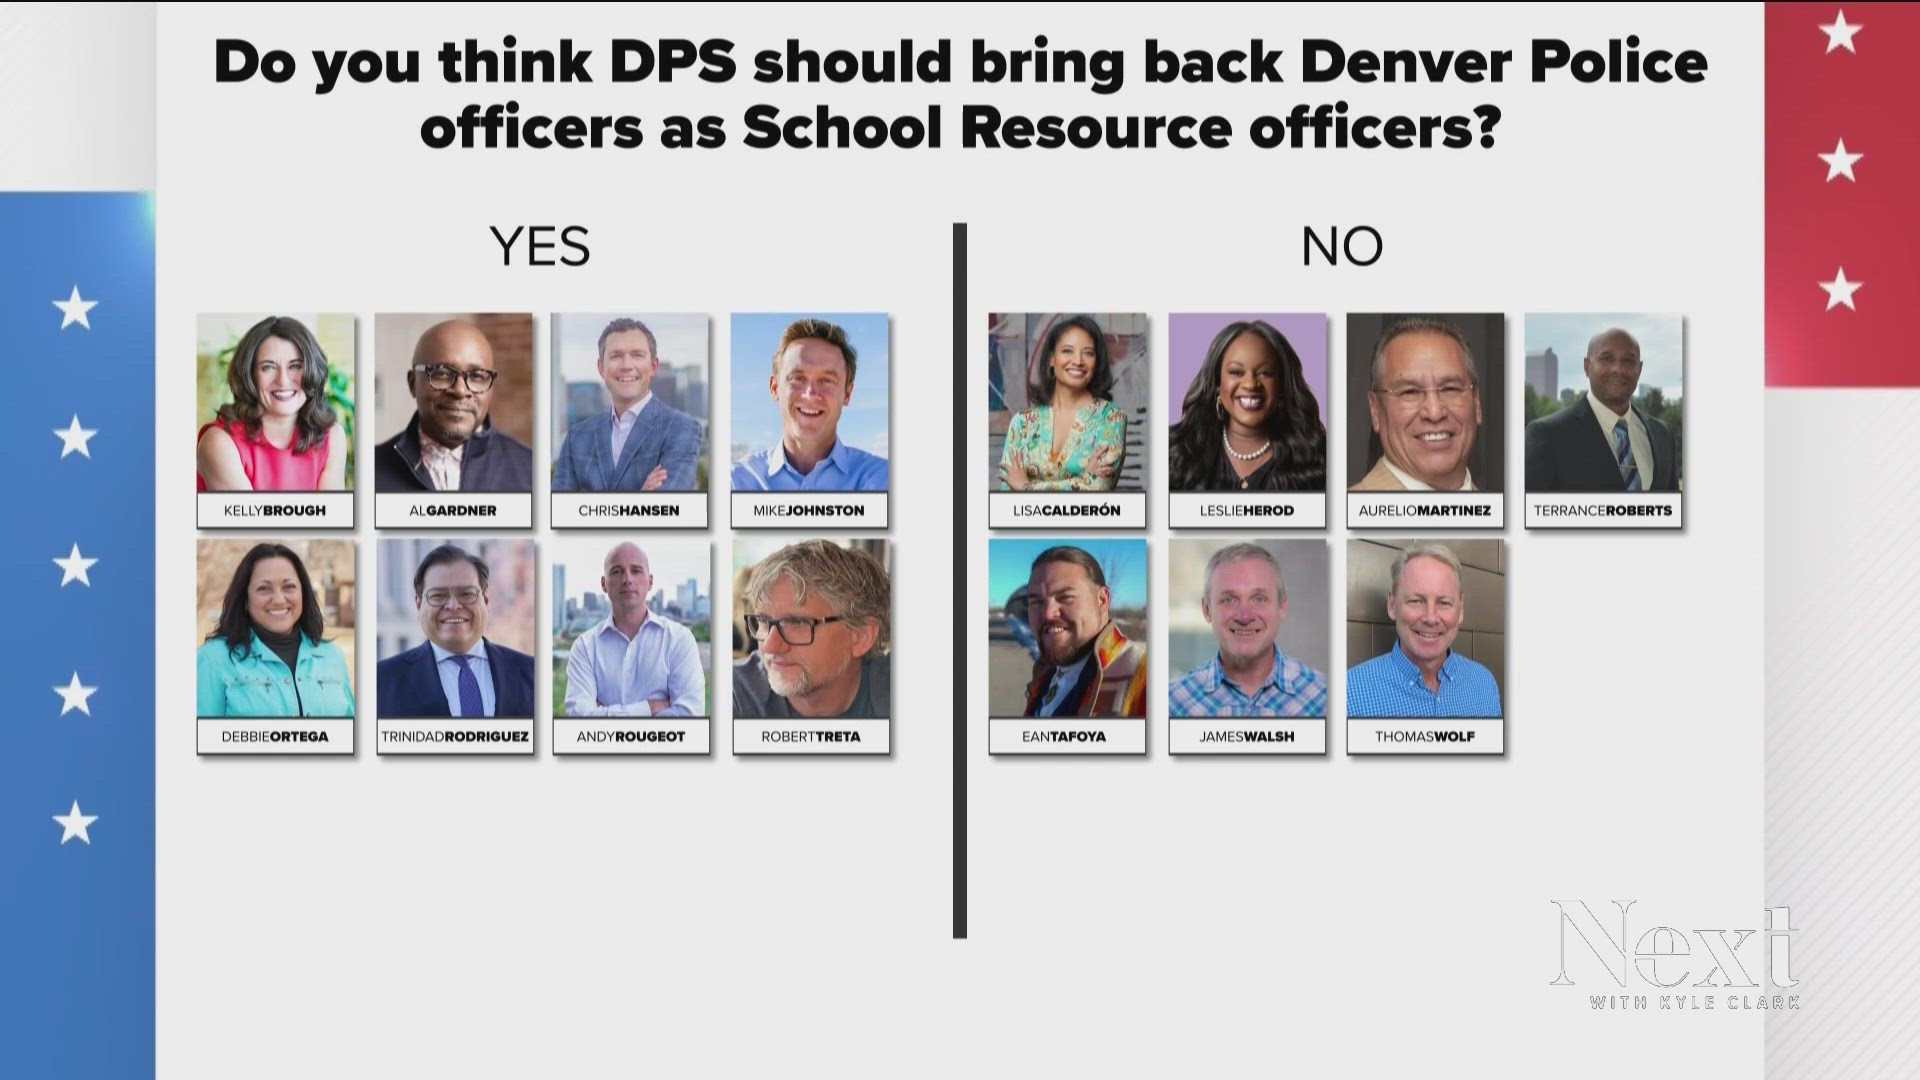 While it's up to the Denver Public School Board, the Denver mayor does have a bully pulpit. We asked where they stand.